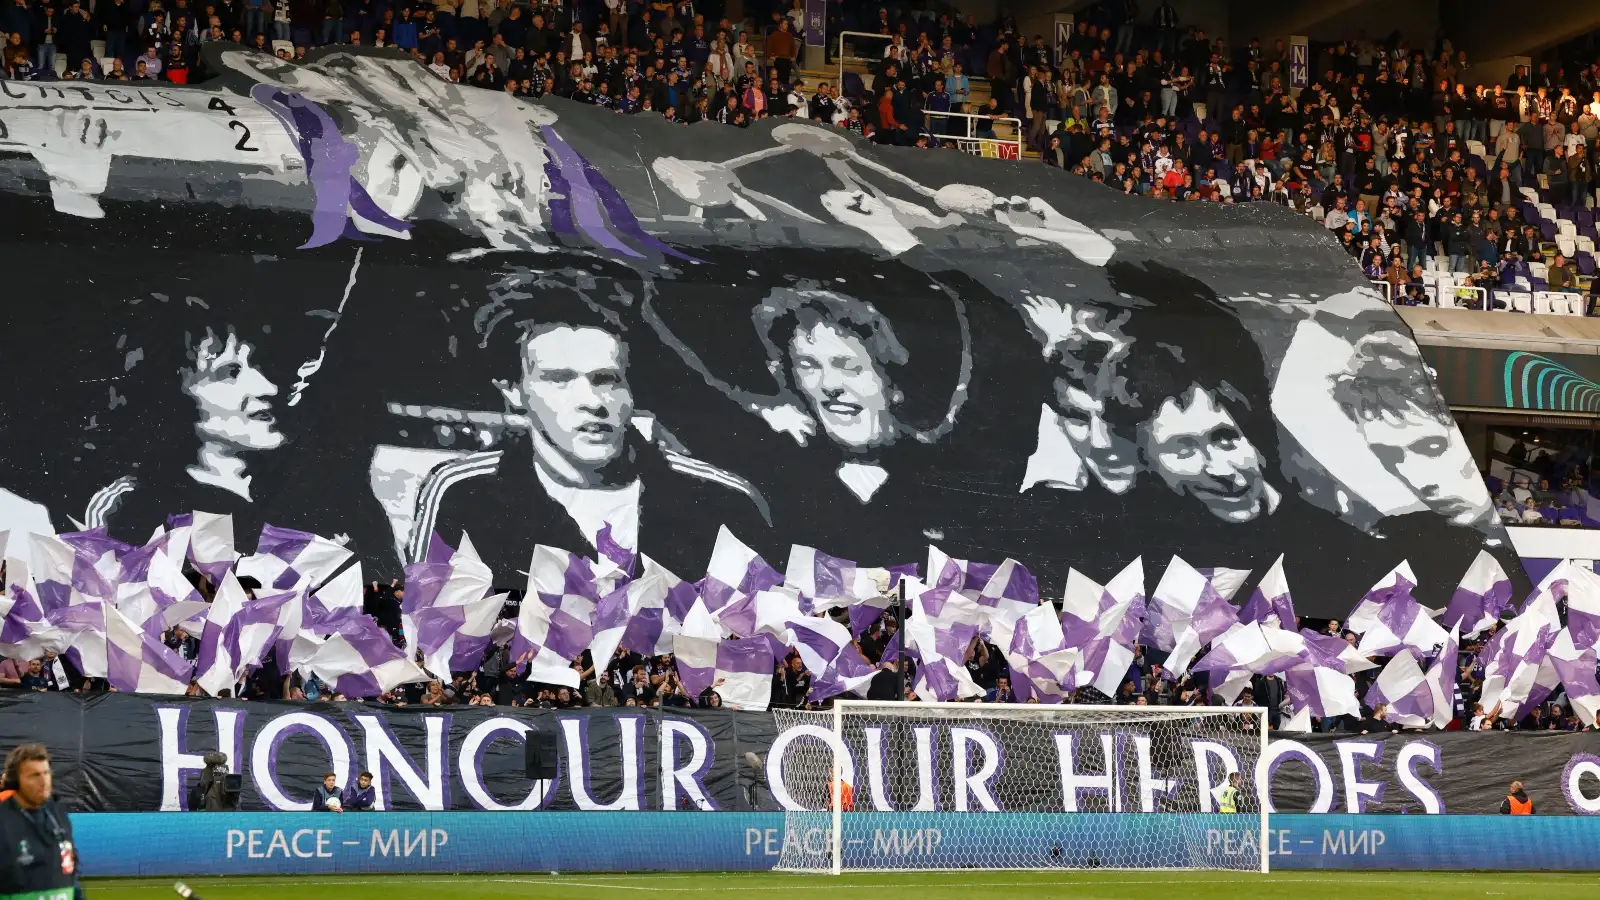 Away Days: Steel, Scamacca, pepper spray and 8% beer at Anderlecht